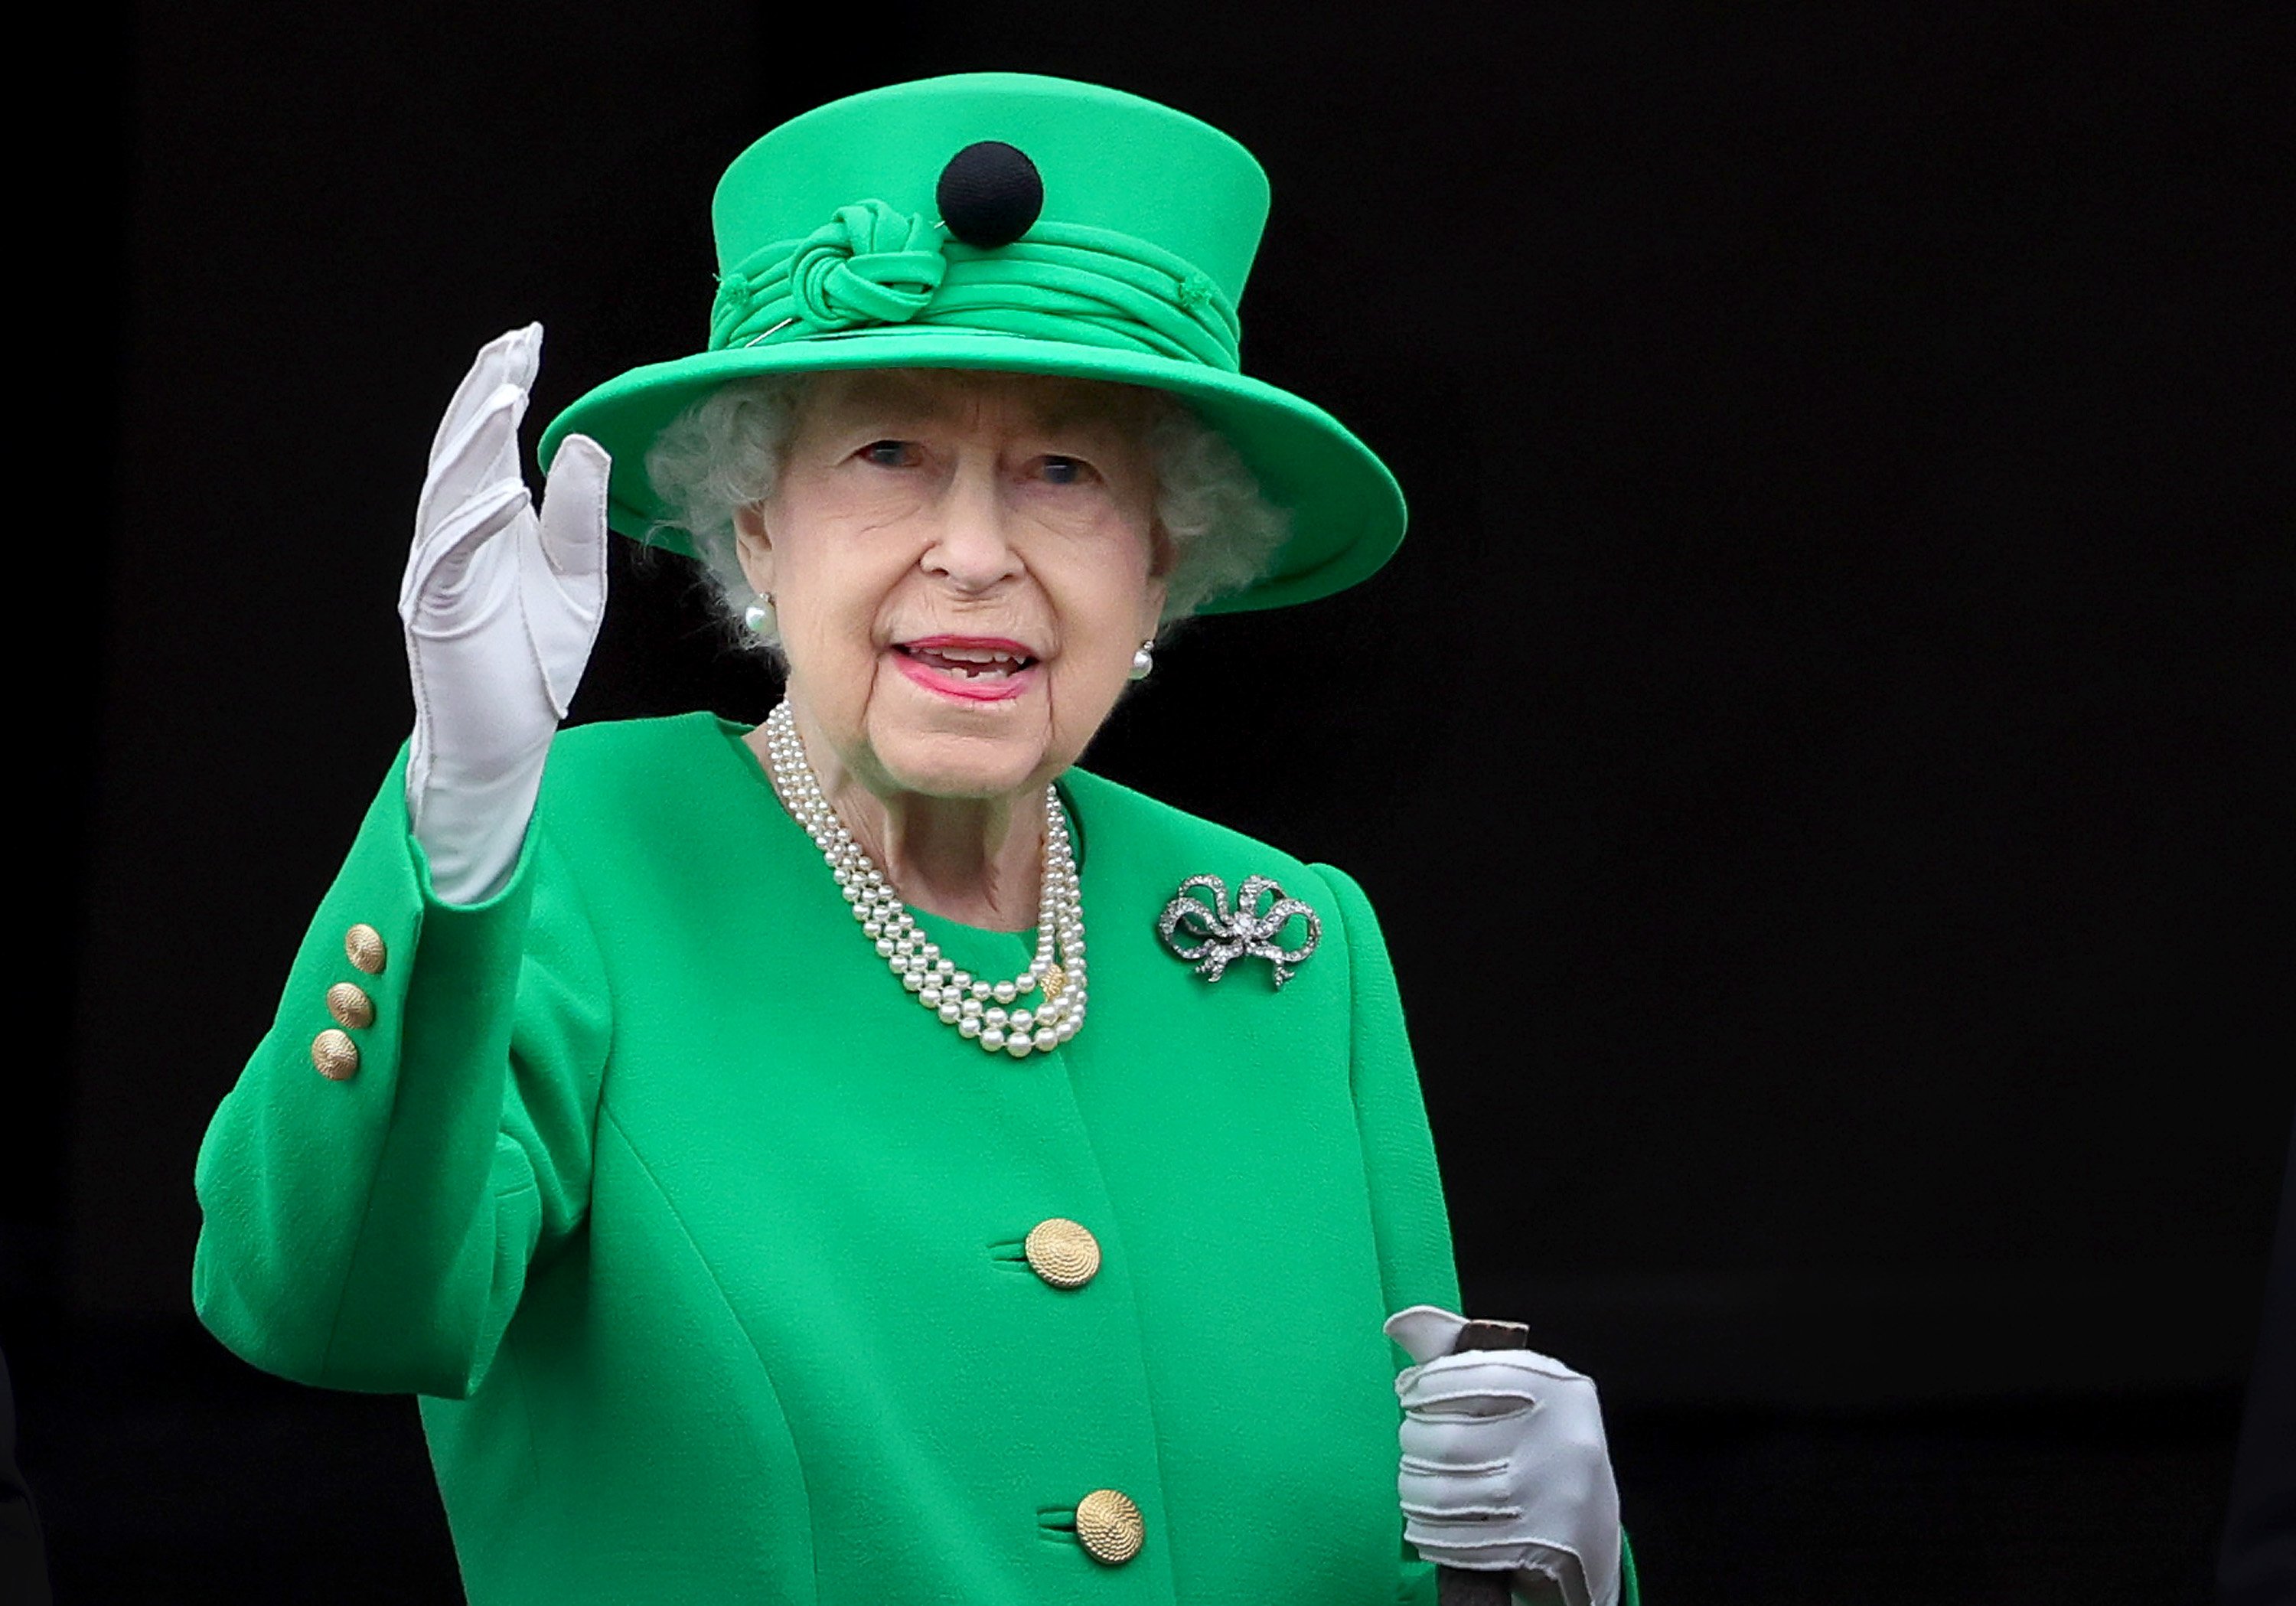 Queen Elizabeth II waves from the balcony of Buckingham Palace during the Platinum Jubilee Pageant on June 05, 2022 in London, England | Source: Getty Images